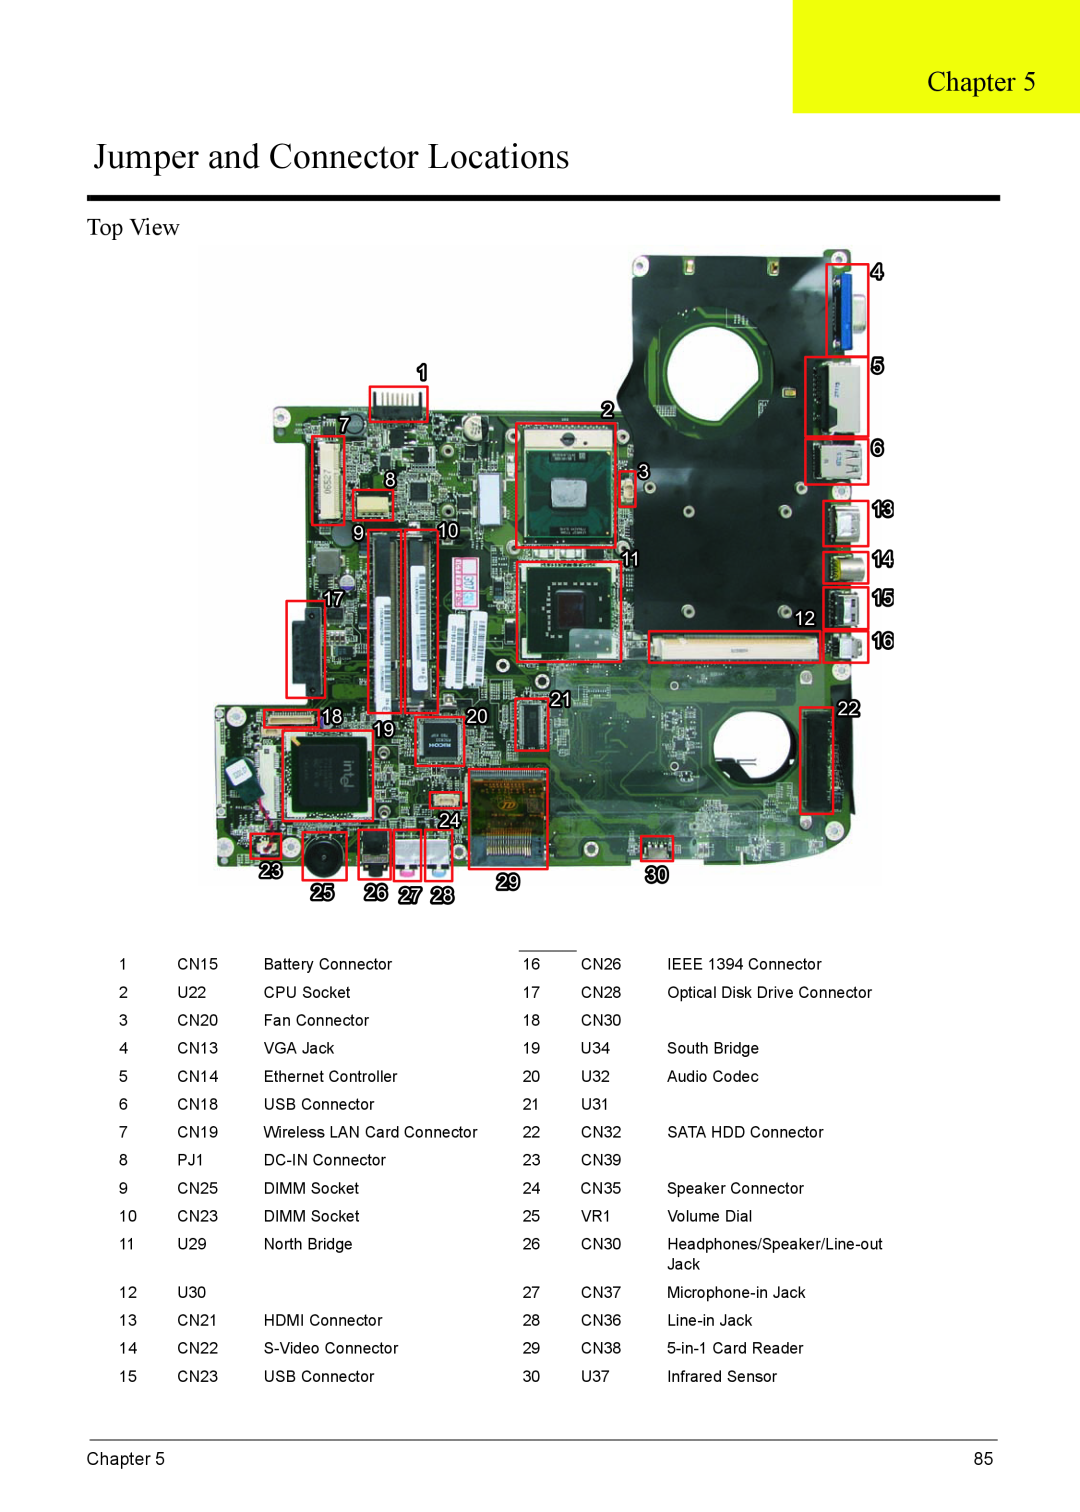 Acer 5920G Series manual Jumper and Connector Locations, Chapter, Top View, 1820, 29 25 26 27 